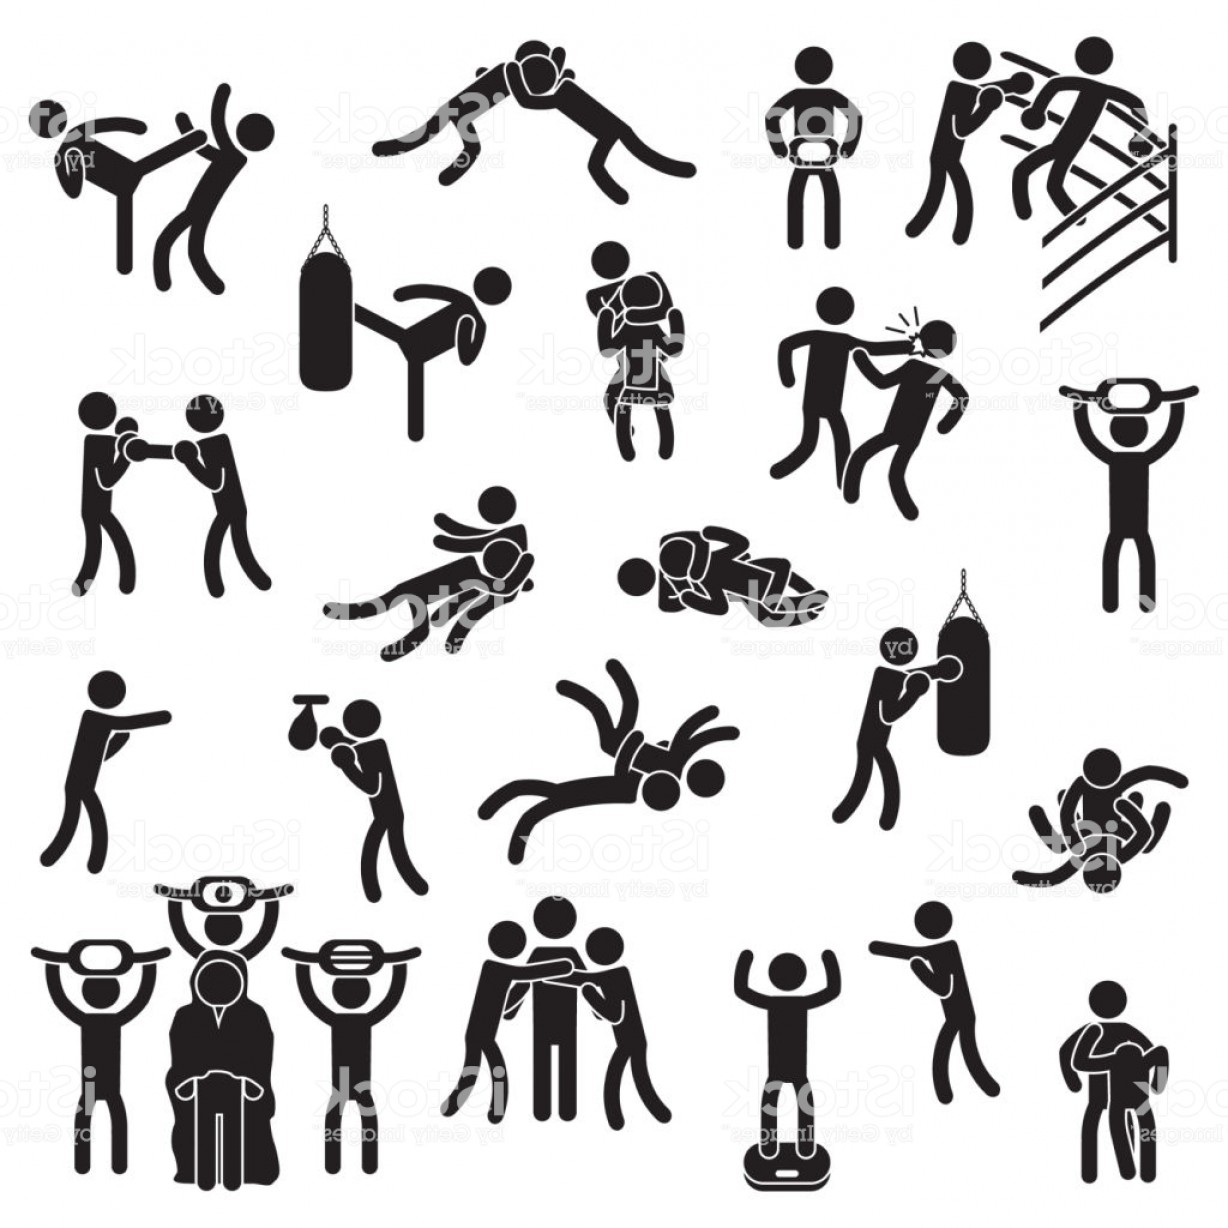 Download Wrestling Silhouette Vector at Vectorified.com | Collection of Wrestling Silhouette Vector free ...